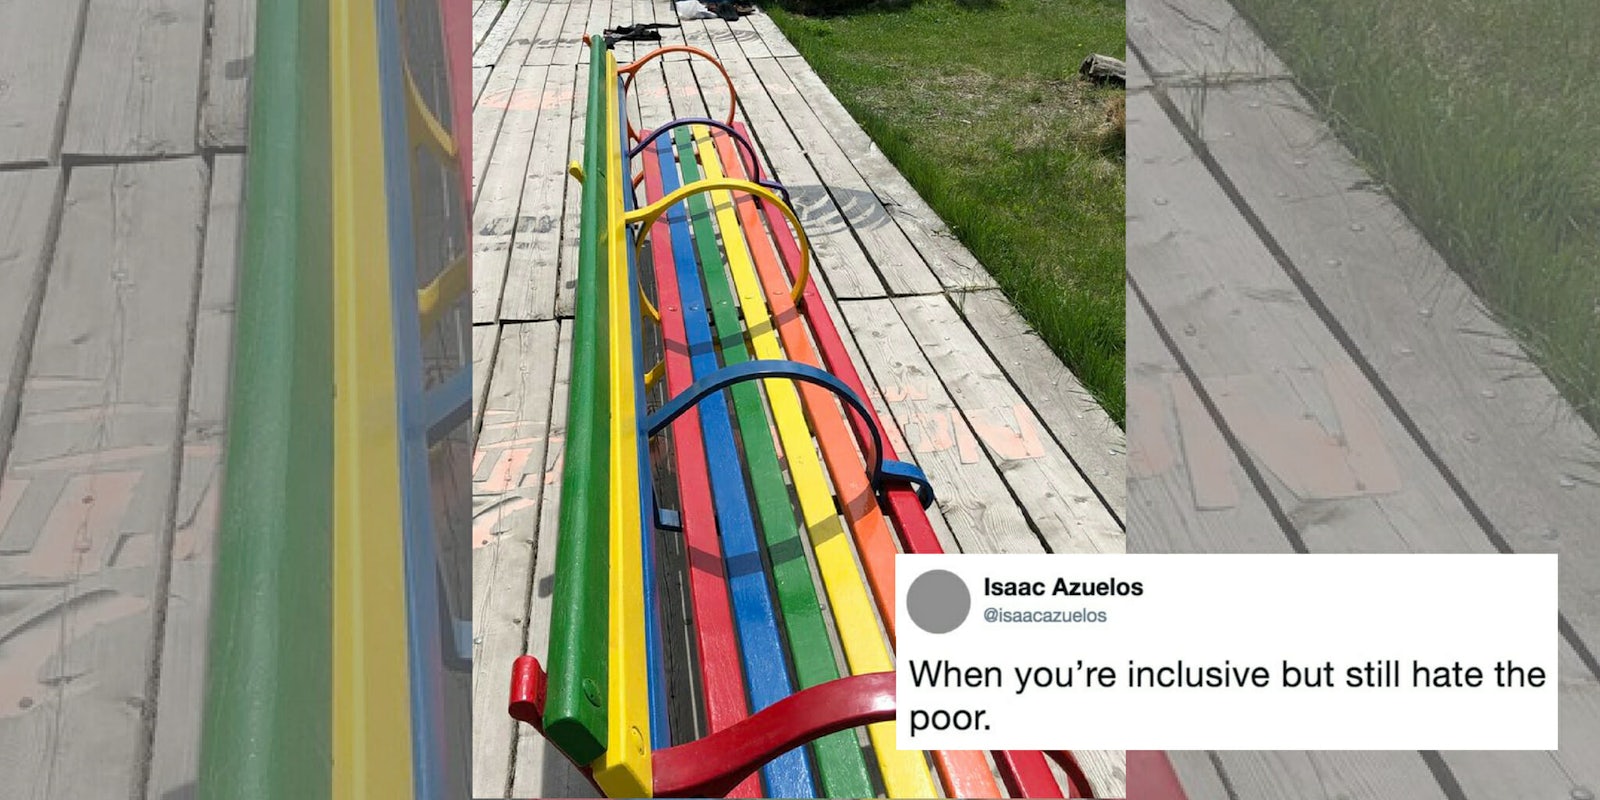 A rainbow bench with dividers appearing to be a type of 'hostile architecture' against homeless people.